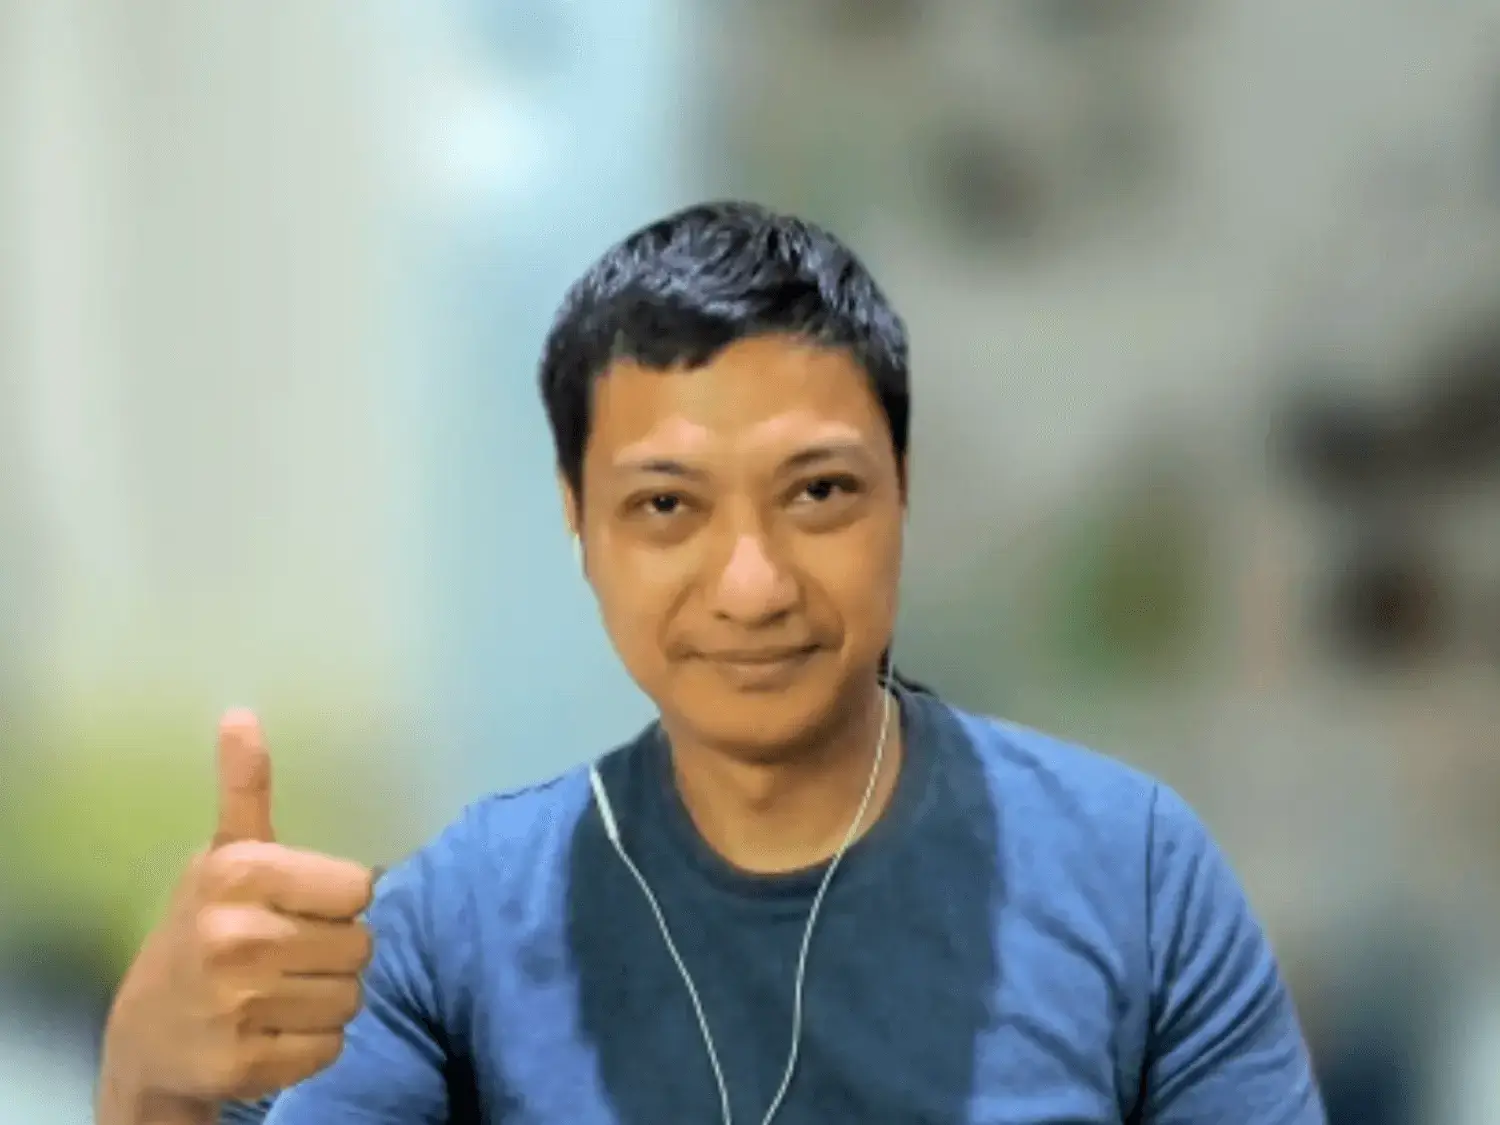 Listen to 2C2P’s Aung Kyaw Moe Who Shares His Story of Business and Success